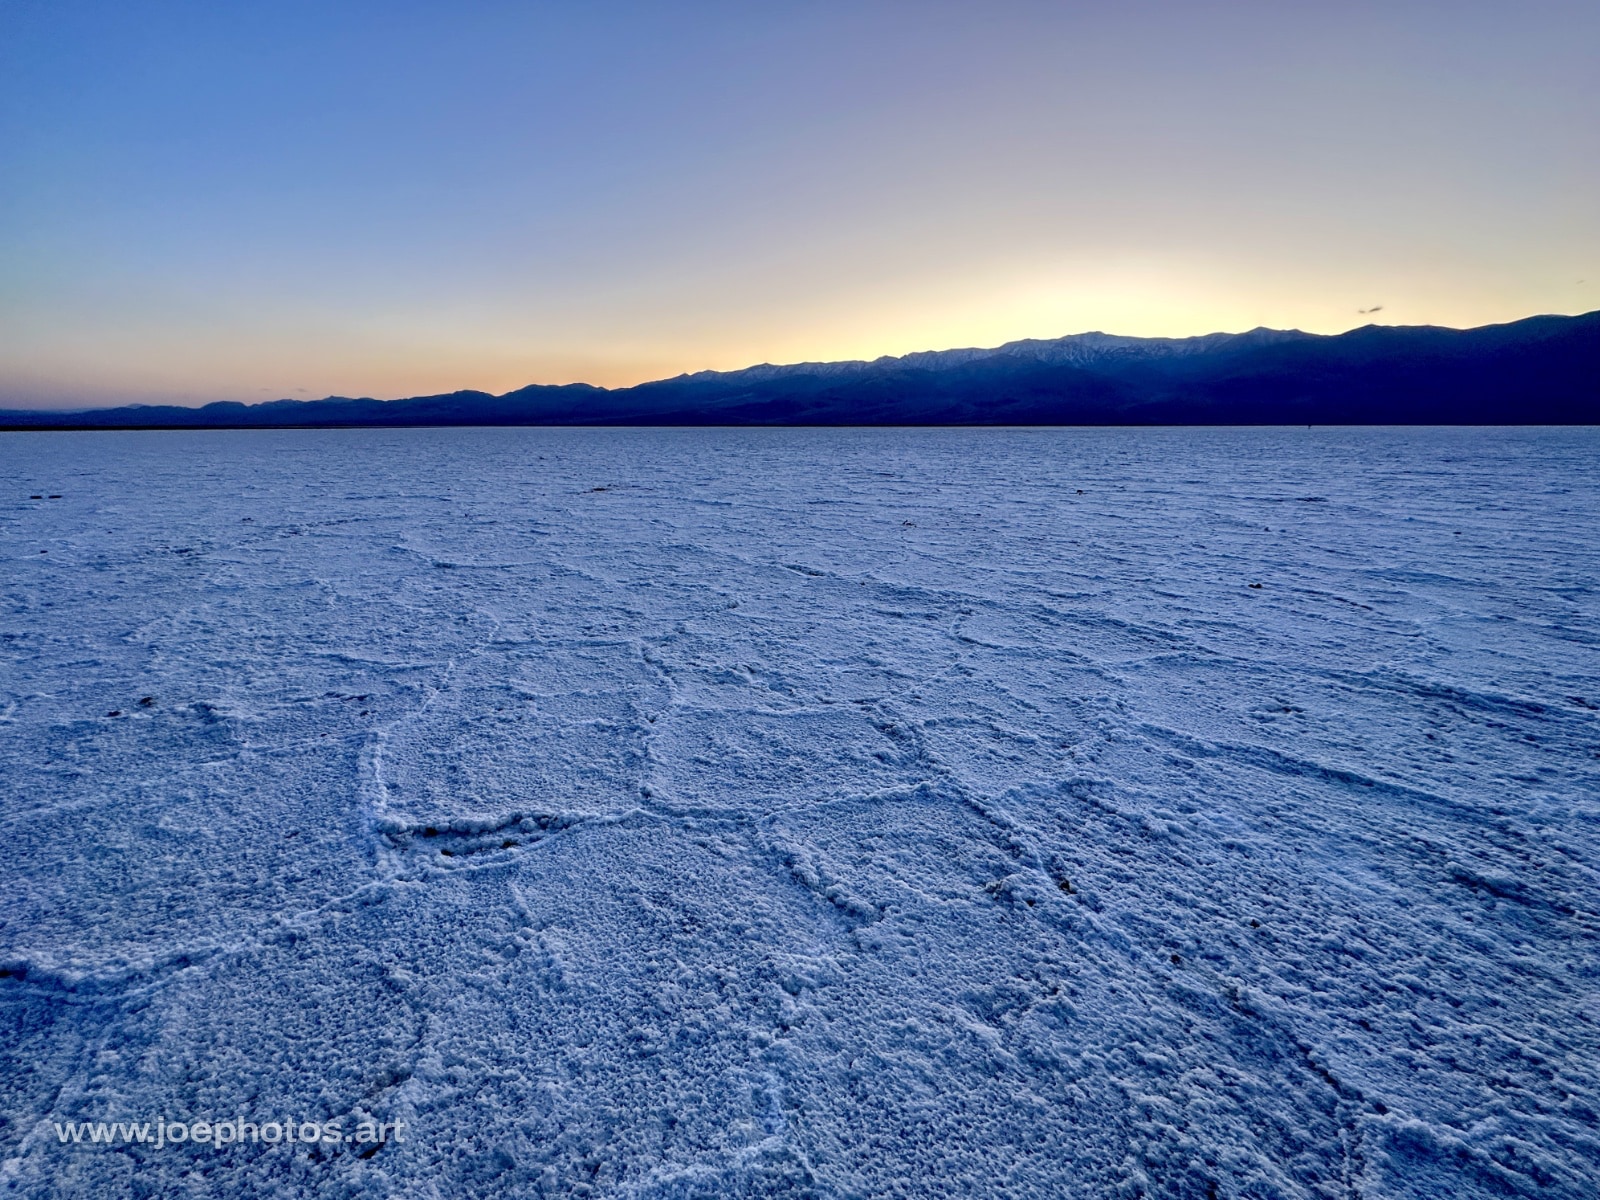 Death Valley at Badwater Basin.